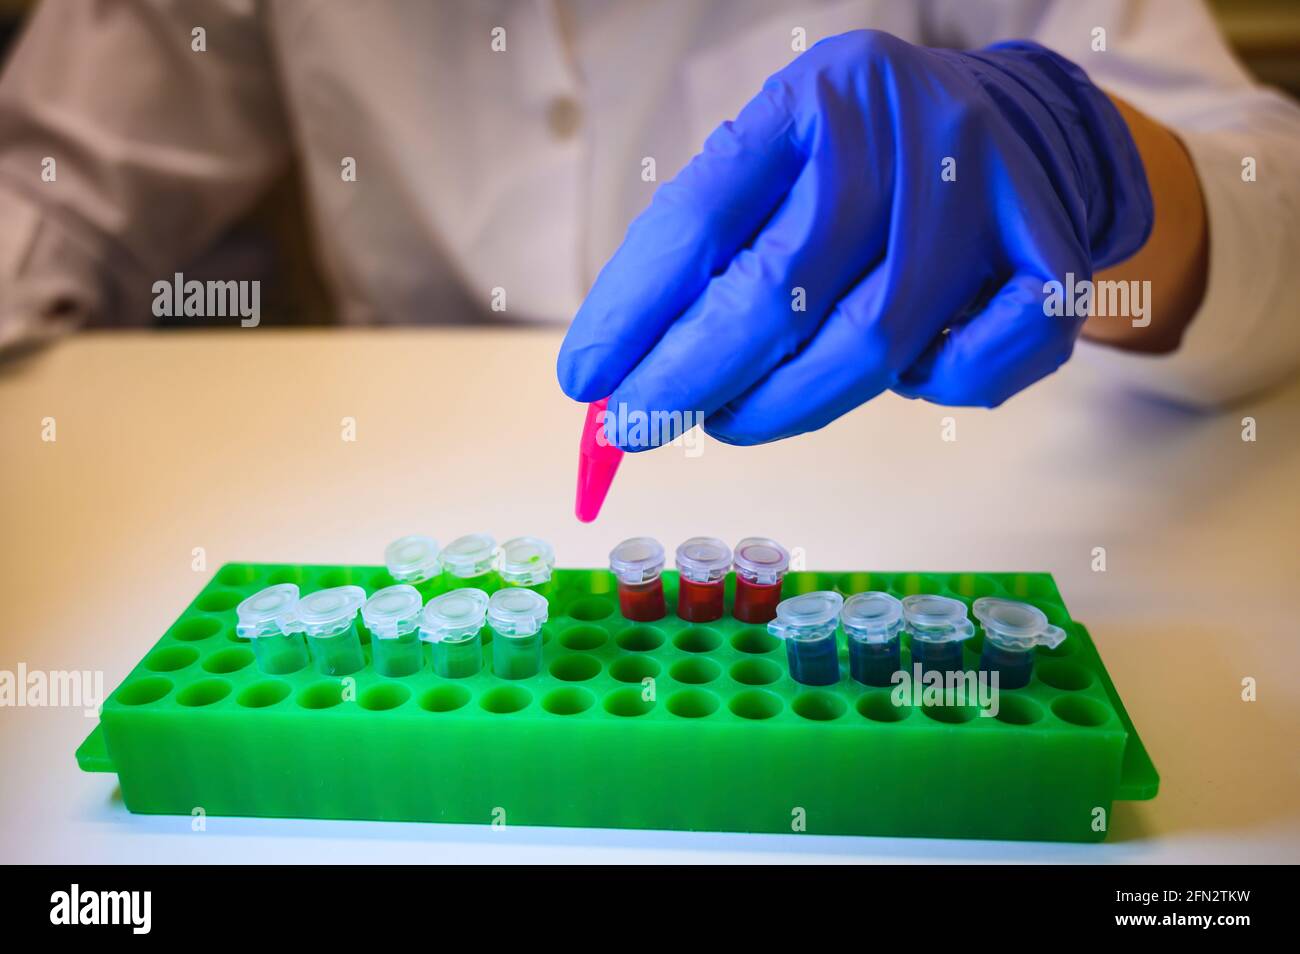 Scientist working with Corona virus patient samples in a molecular biology laboratory wearing gloves as safety measurement Stock Photo